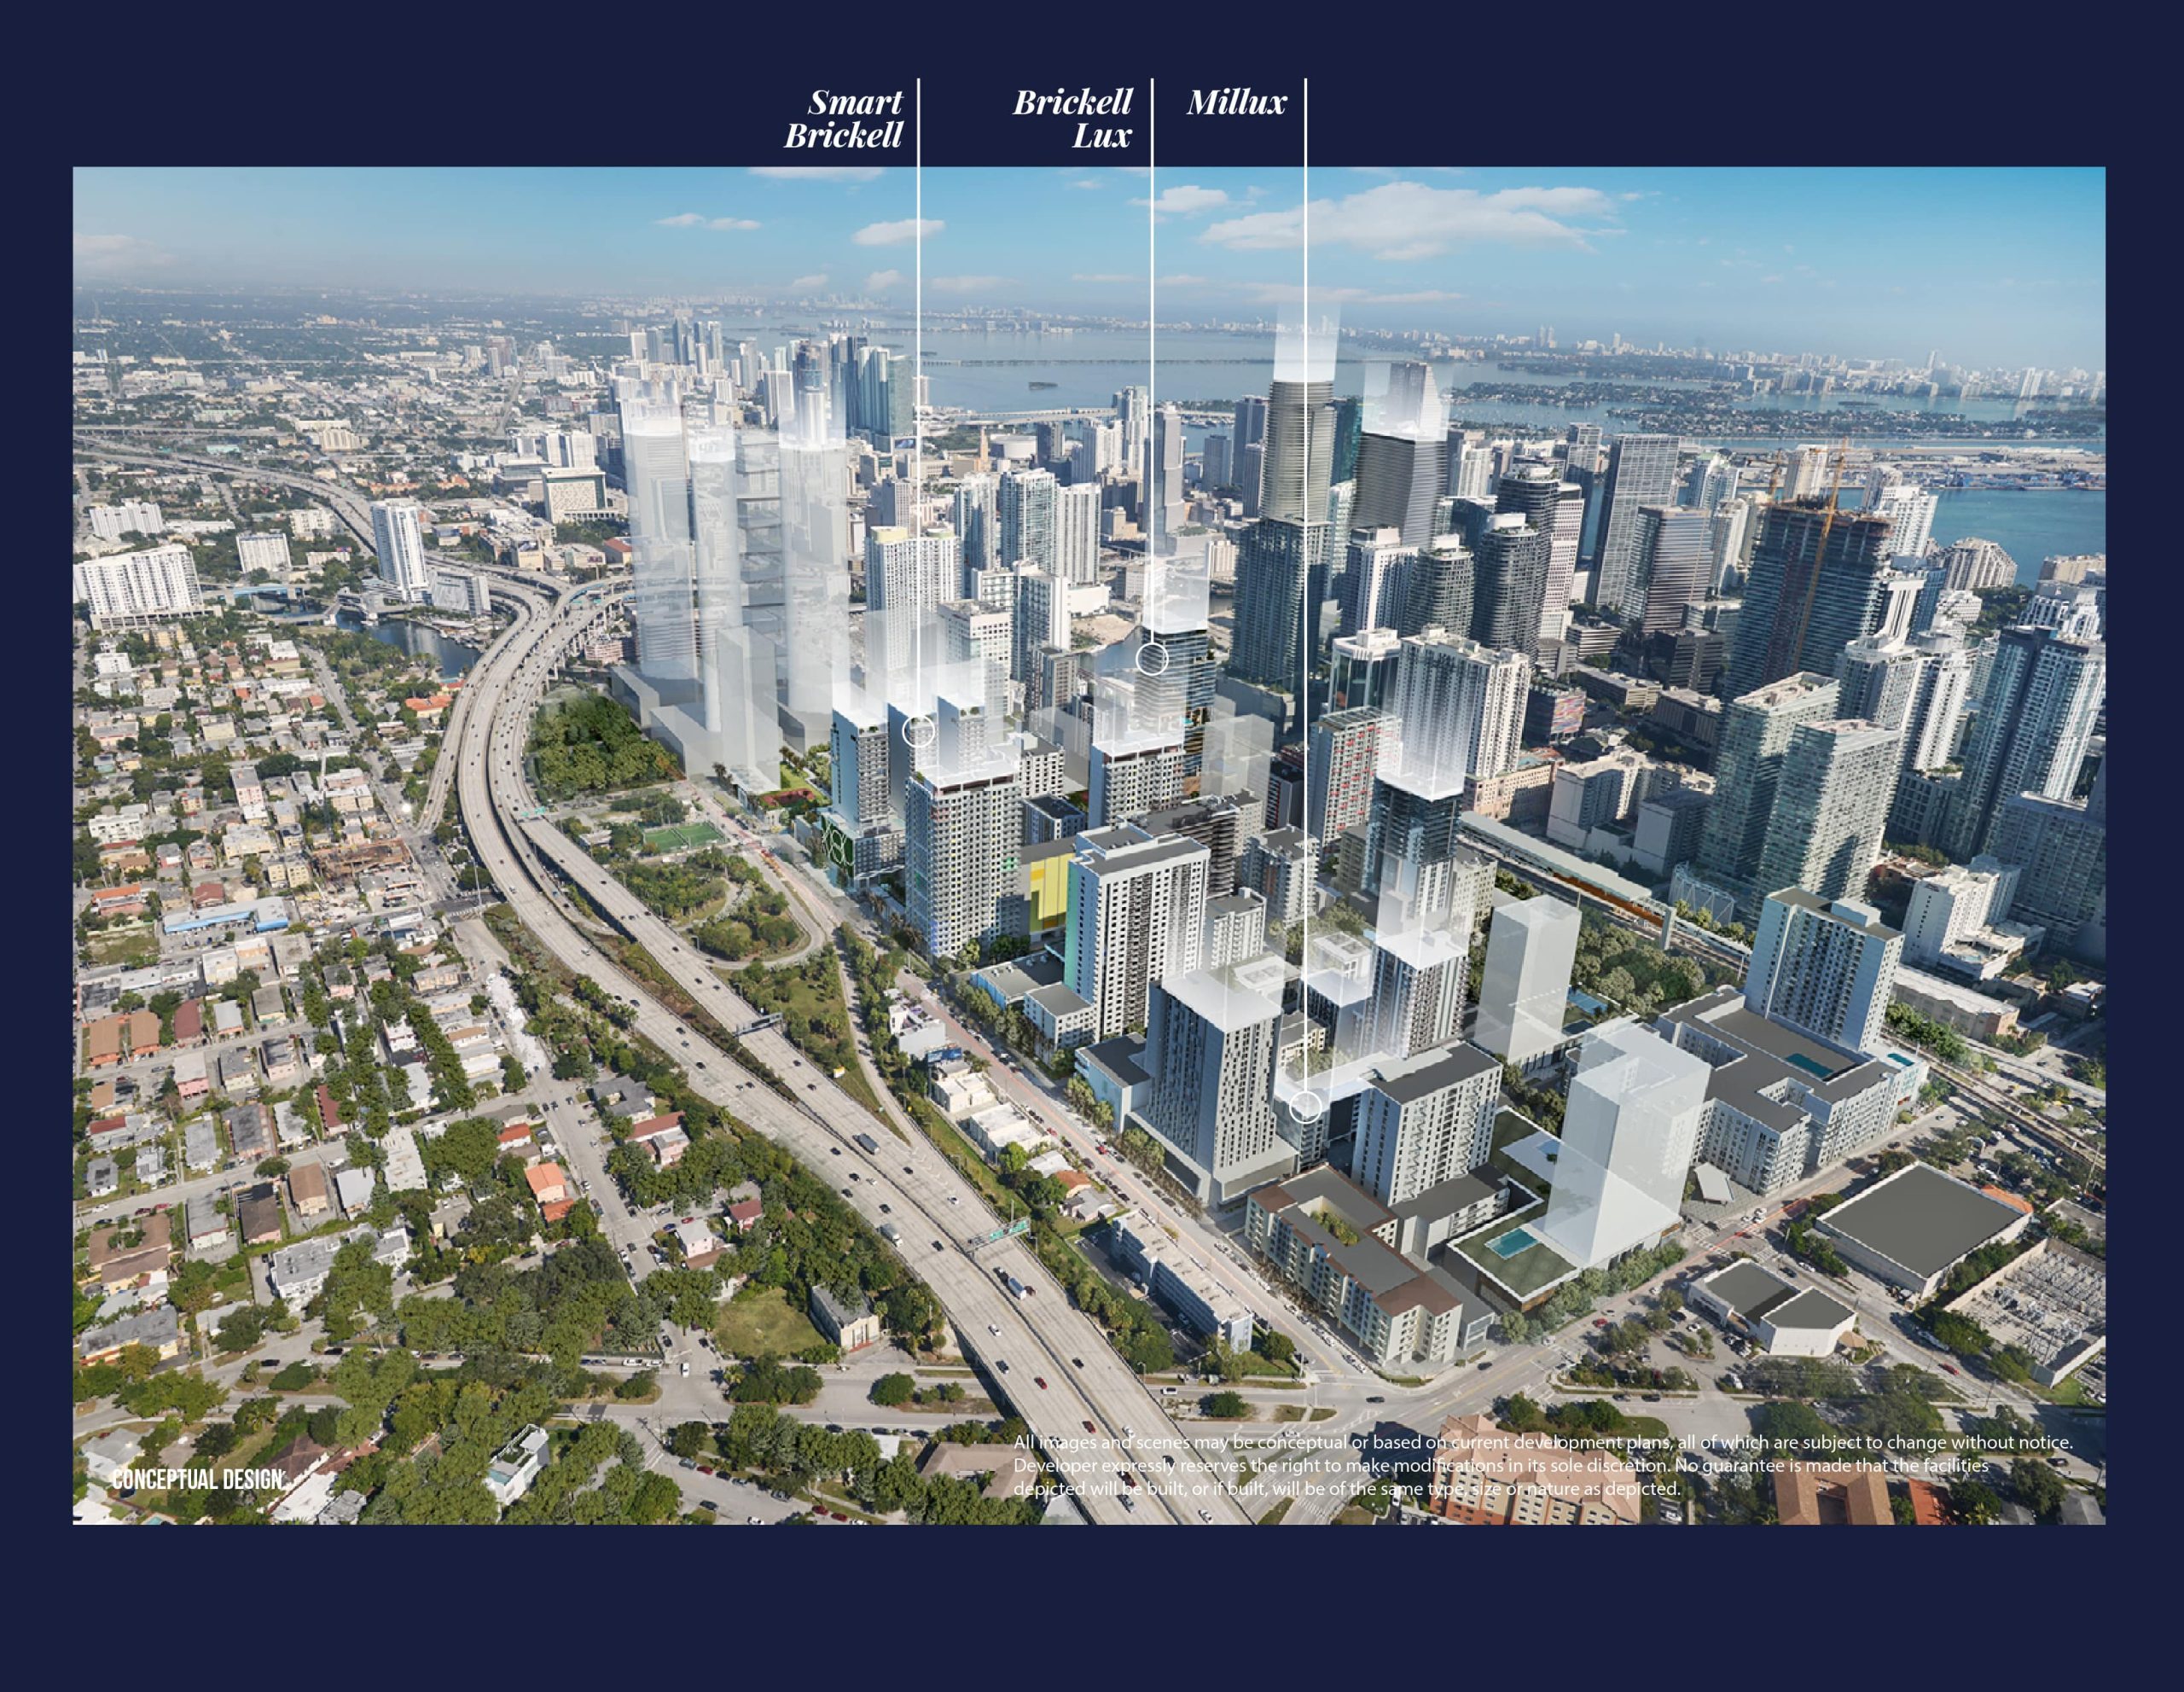 New renderings show the extent of the transformation that West Brickell will experience over the next five years.